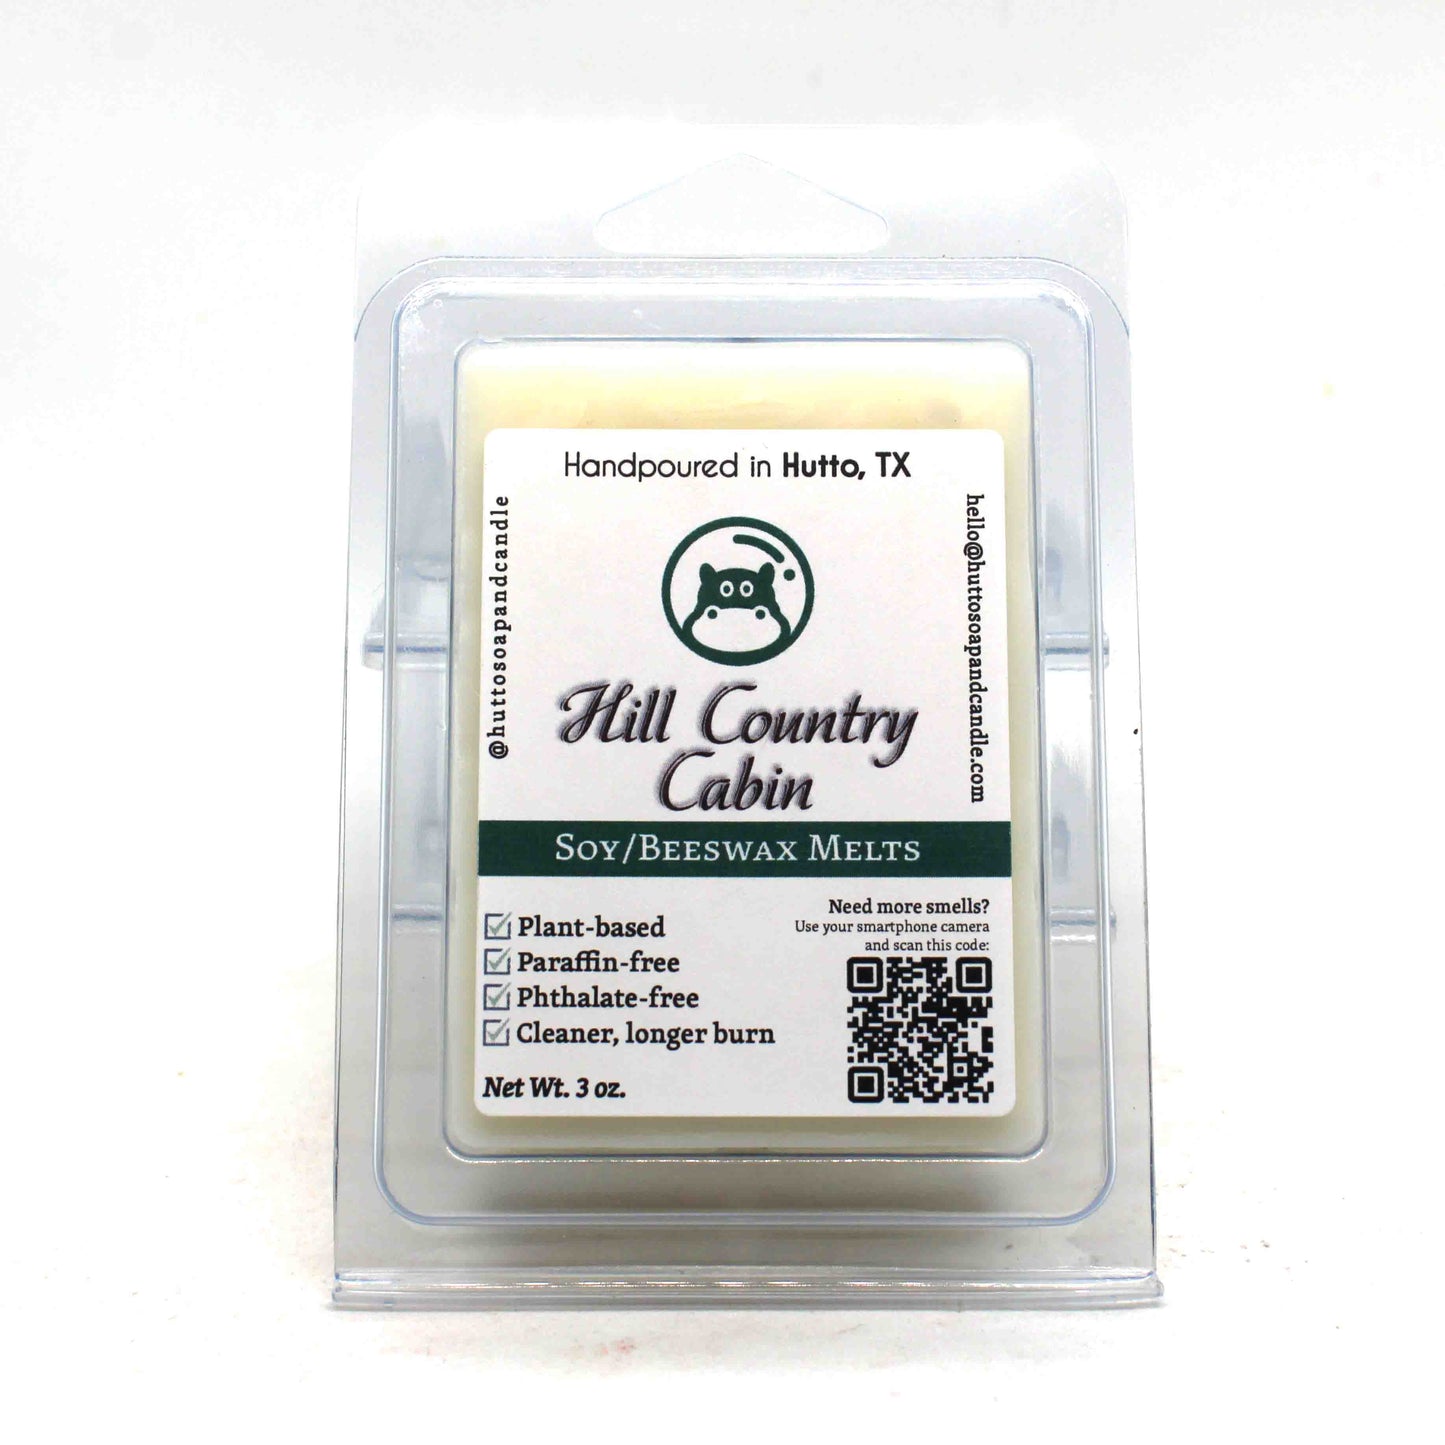 Hill Country Cabin Wax Melts